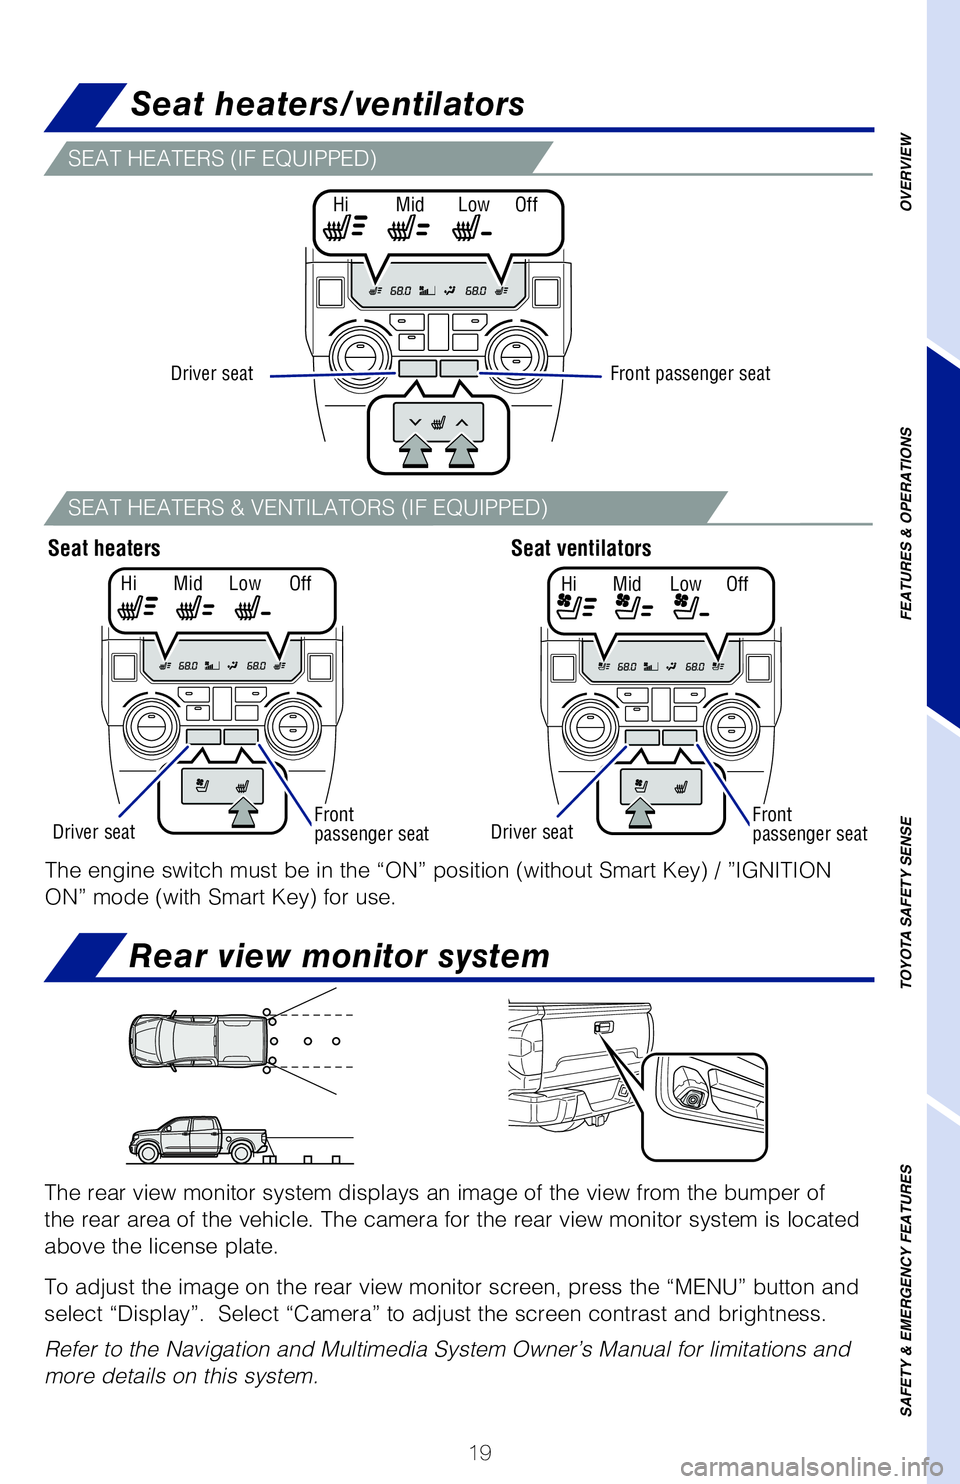 TOYOTA TUNDRA 2020   (in English) Owners Manual 19
SEAT HEATERS (IF EQUIPPED)
SEAT HEATERS & VENTILATORS (IF EQUIPPED)
The rear view monitor system displays an image of the view from the bumper of  
the rear area of the vehicle. The camera for the 